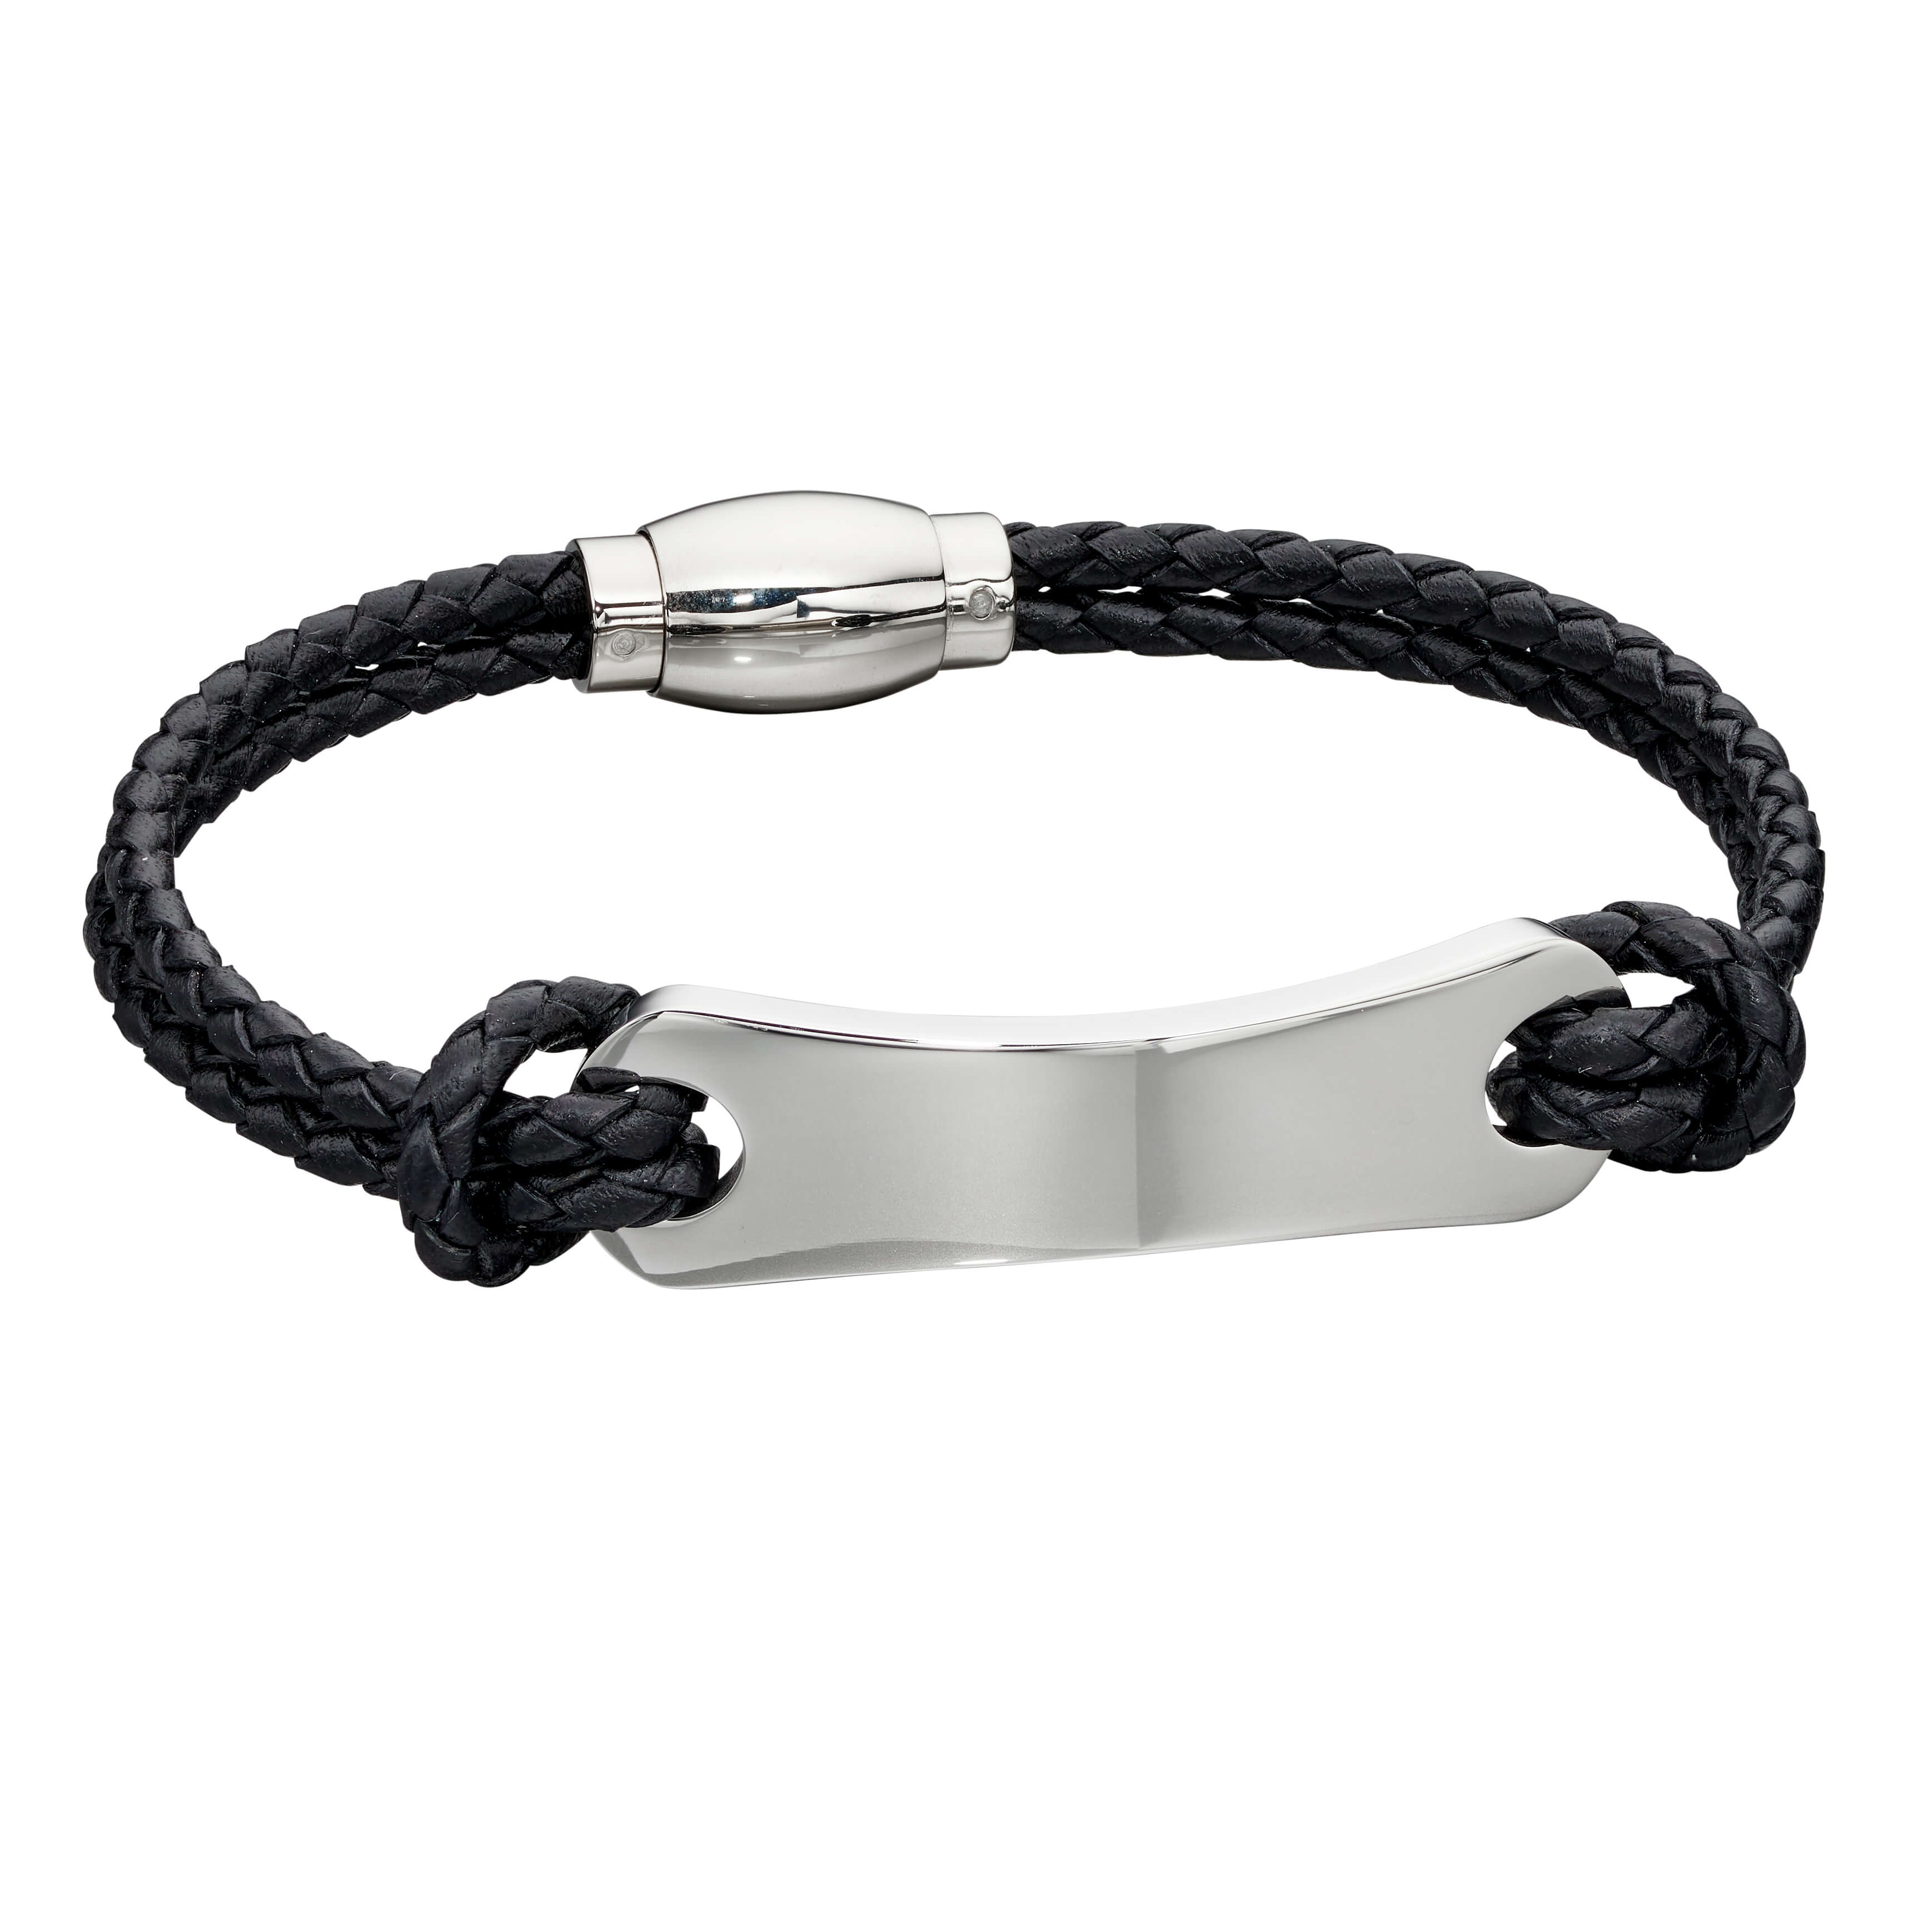 Stainless Steel & Black Woven Leather ID Bar Bracelet - FB0009 - Hallmark Jewellers Formby & The Jewellers Bench Widnes